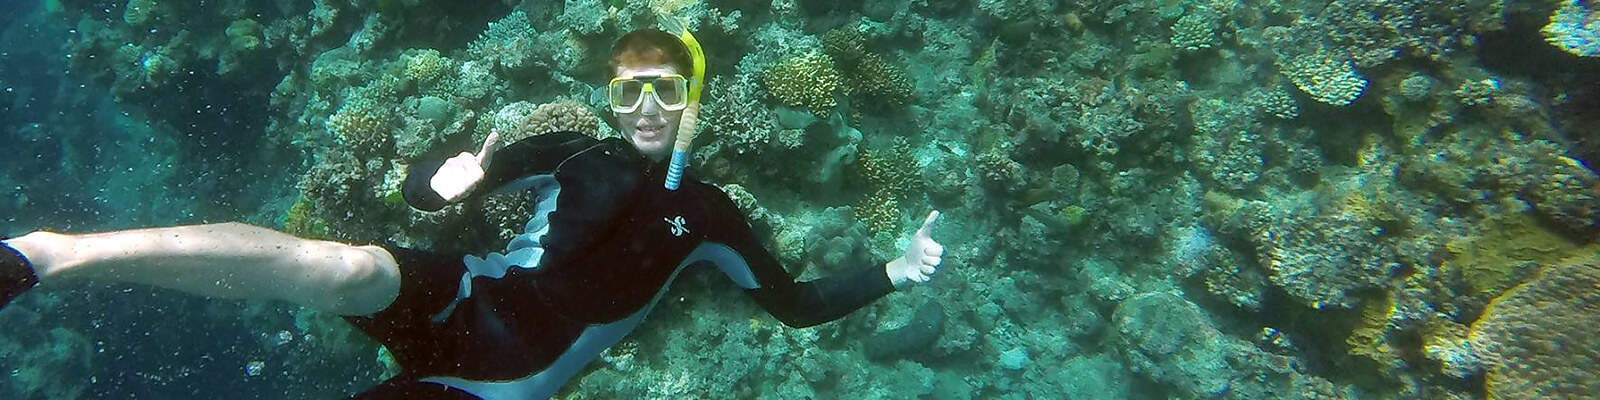 A student snorkeling in Australia